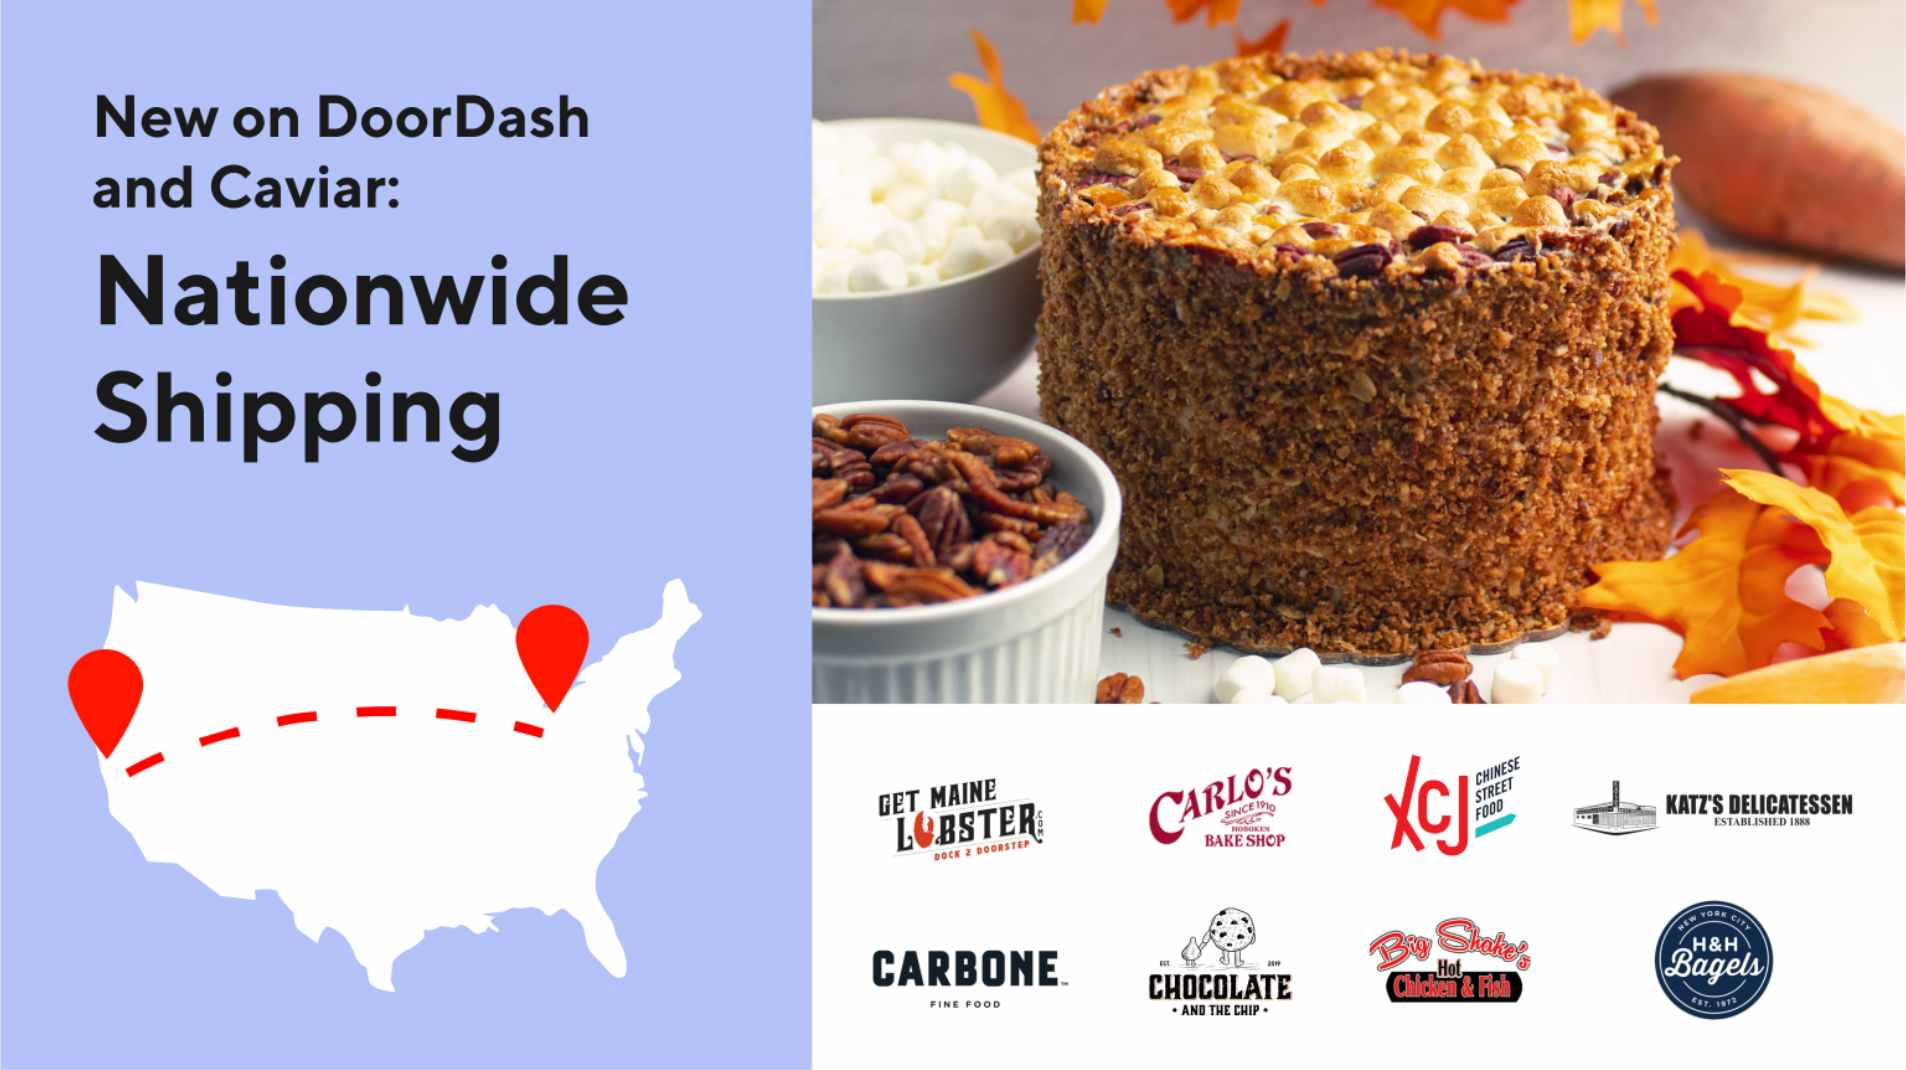 DoorDash and Caviar's advertisement for nationwide shipping of local foods